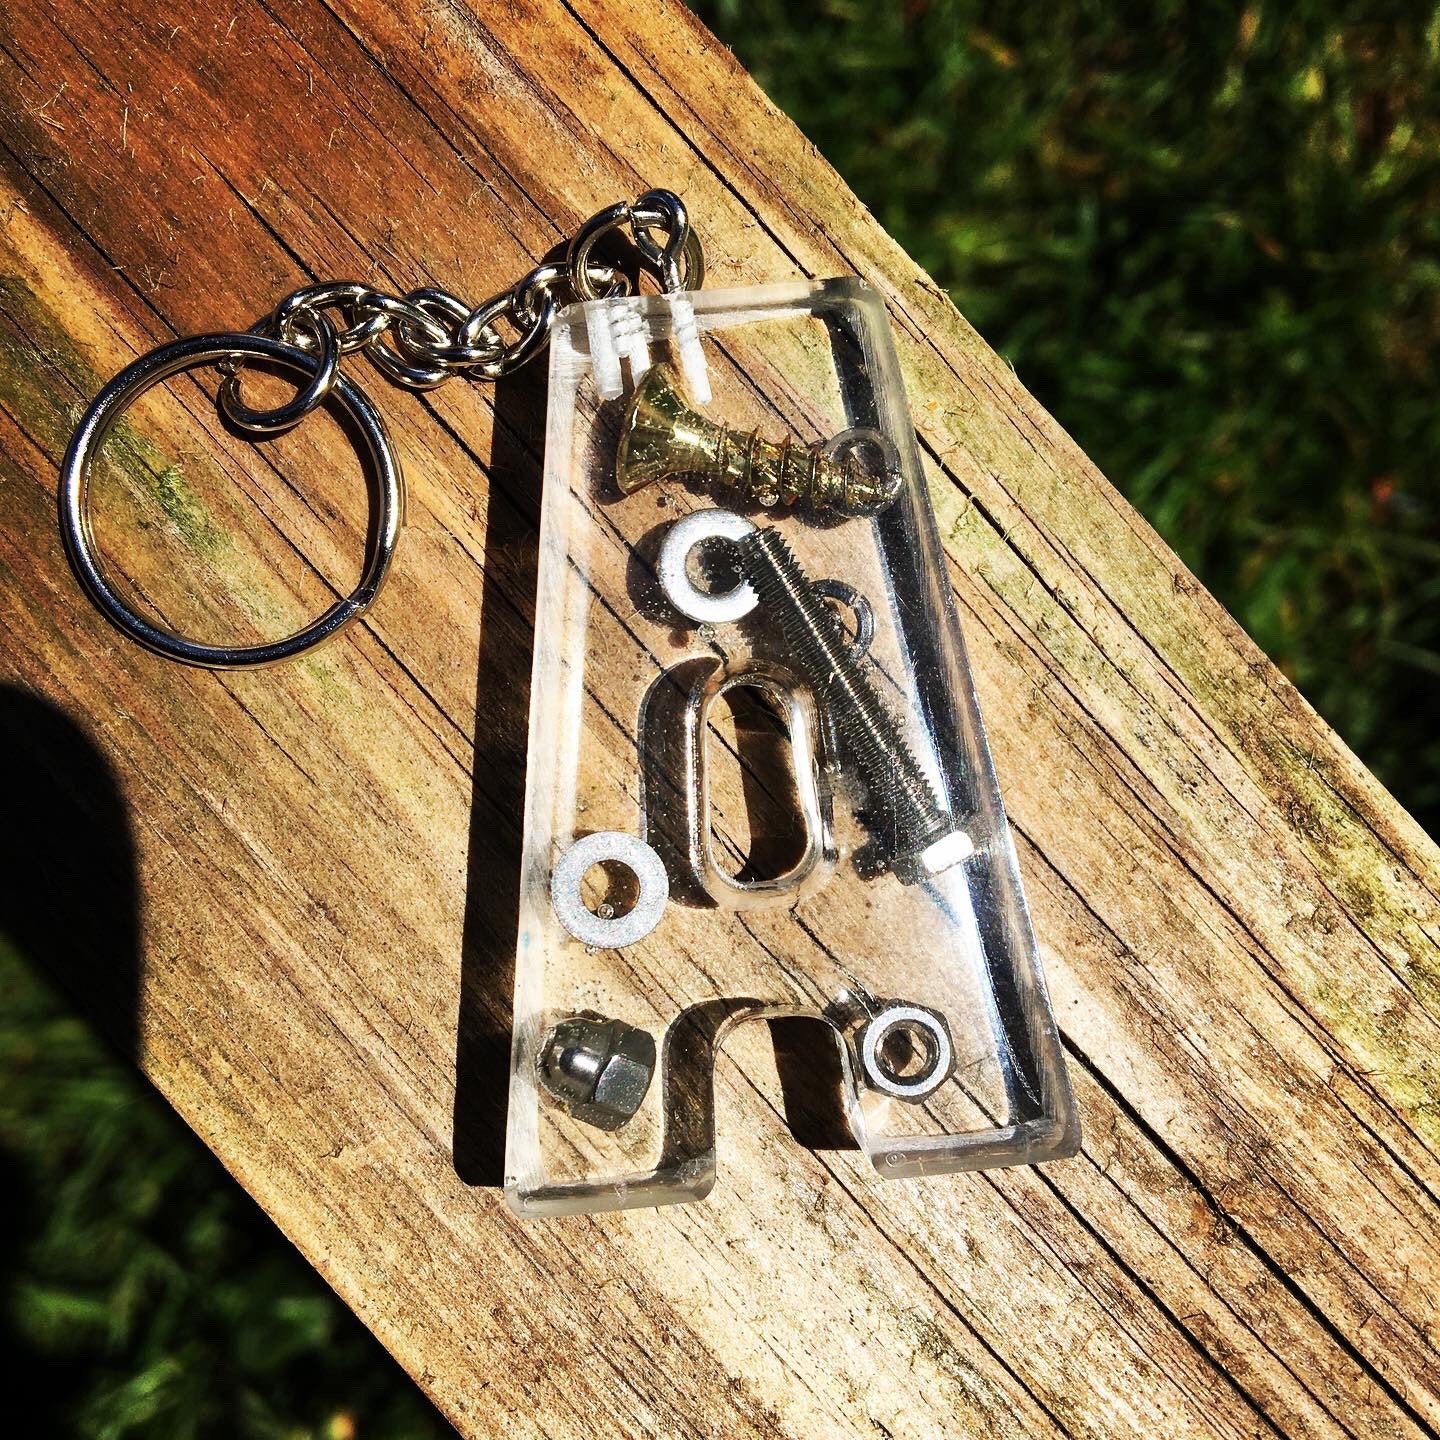 Nut and Bolt Letter Key ring